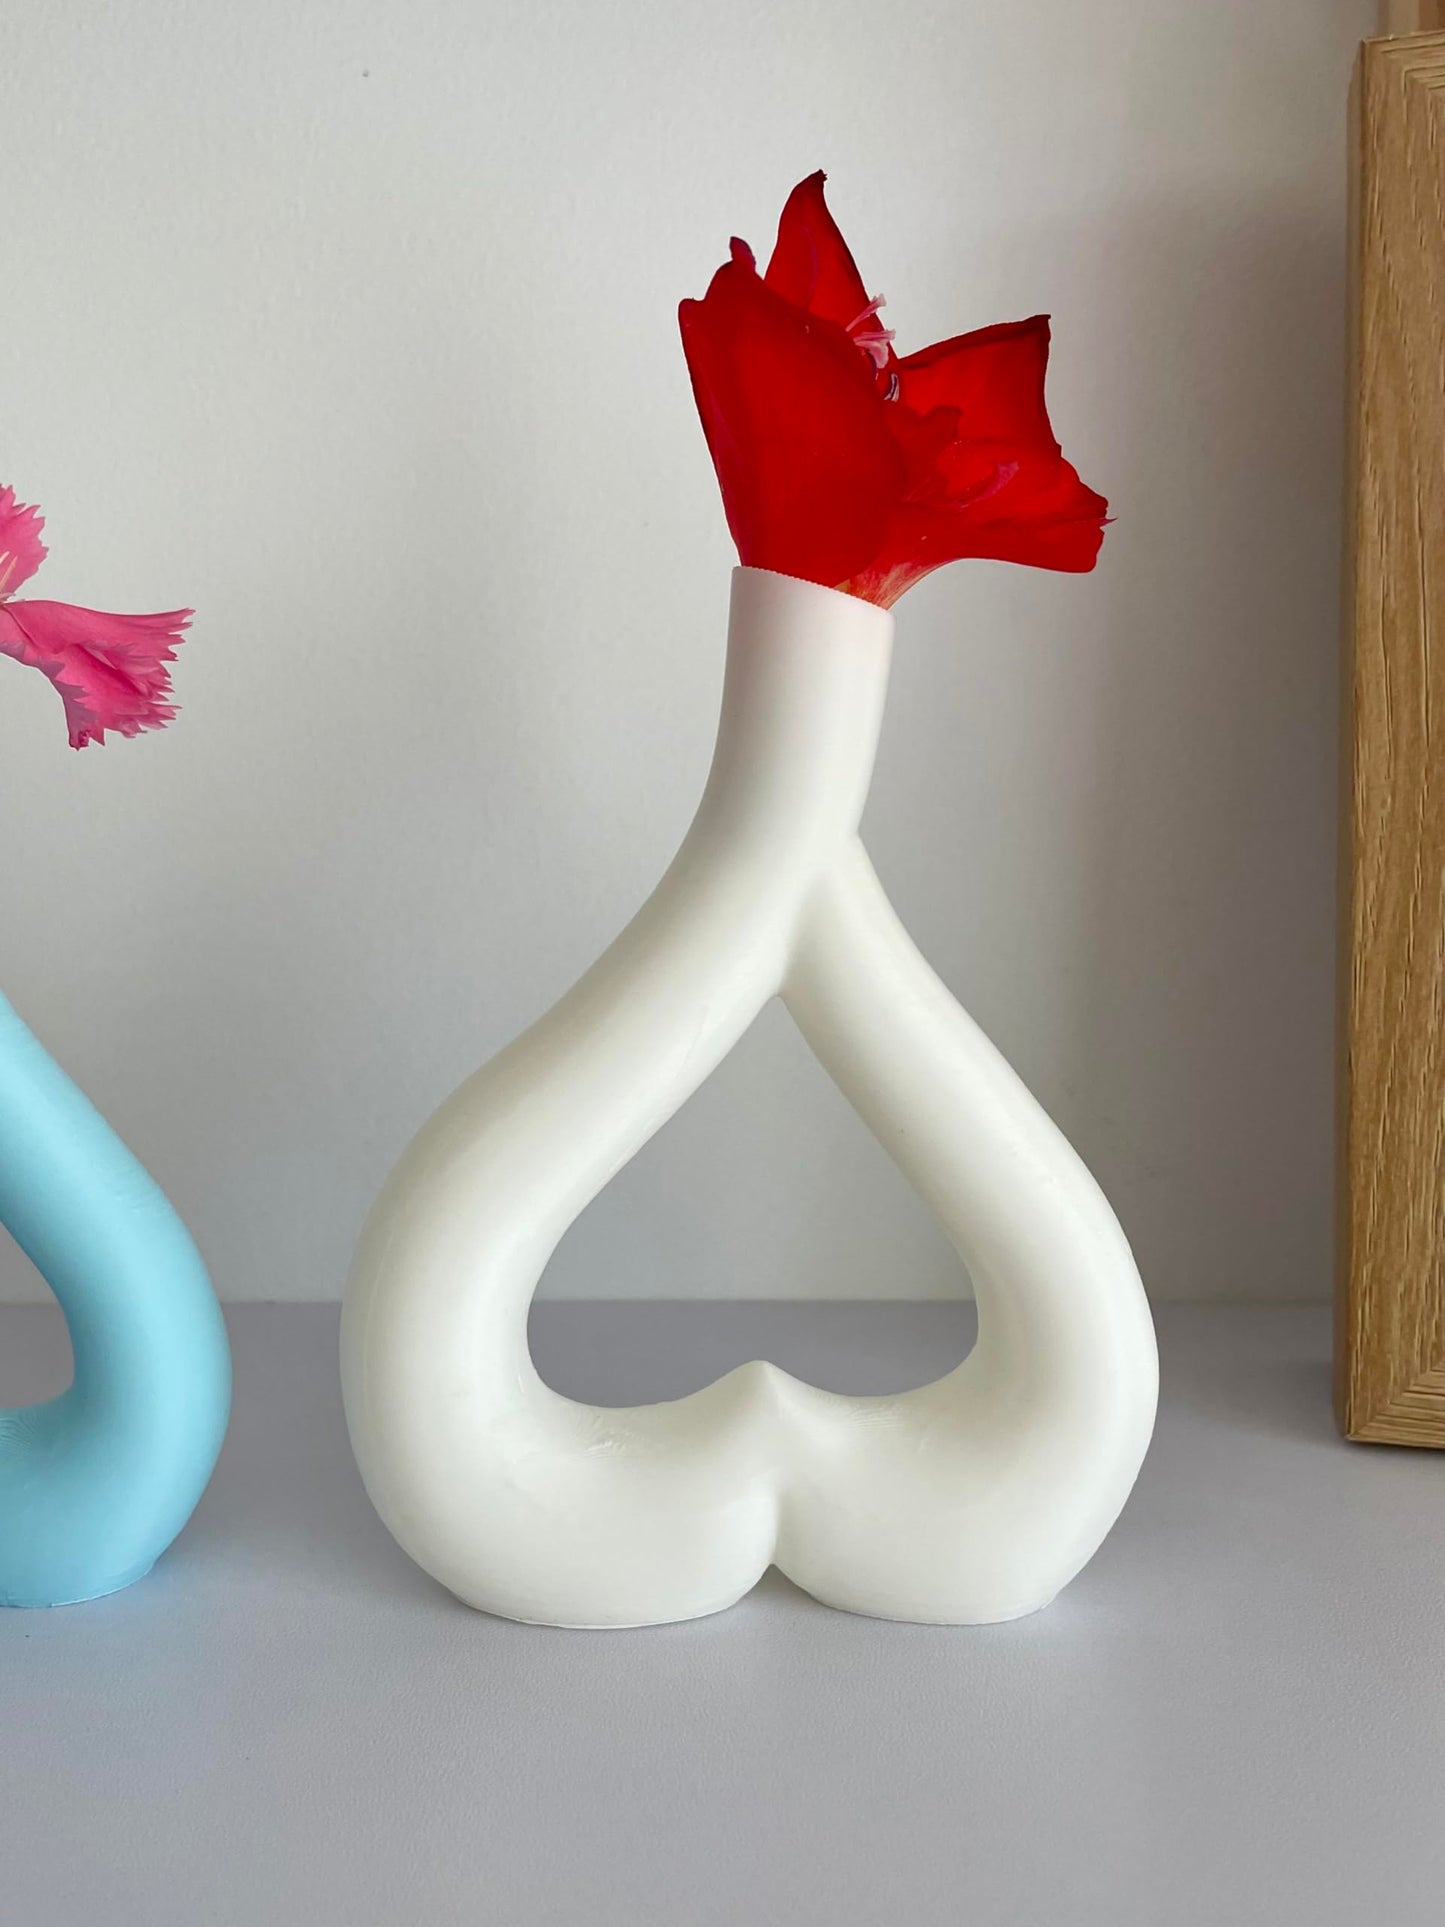 GoodBuy.ai Heart Outlined 3D Printed Vase - Unique Upside-Down Heart Design